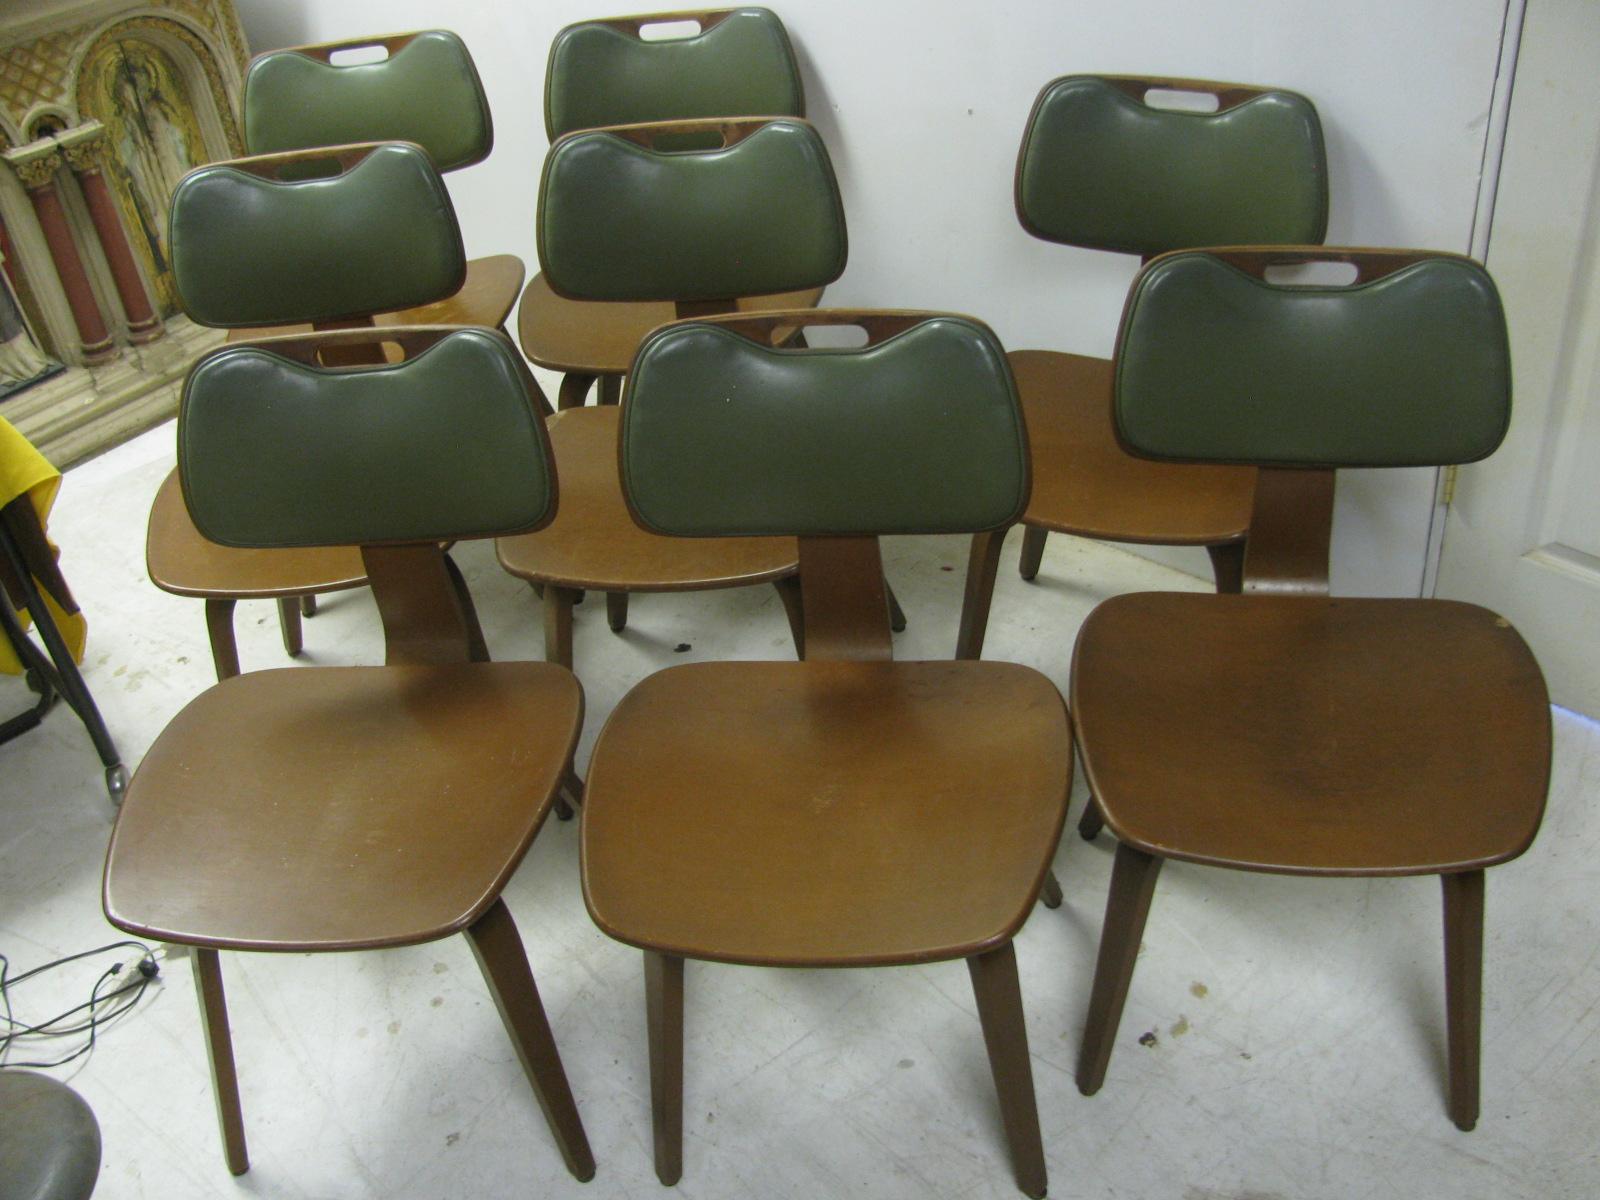 Mid-20th Century Set of Eight Mid-Century Modern Dining Chairs by Thonet